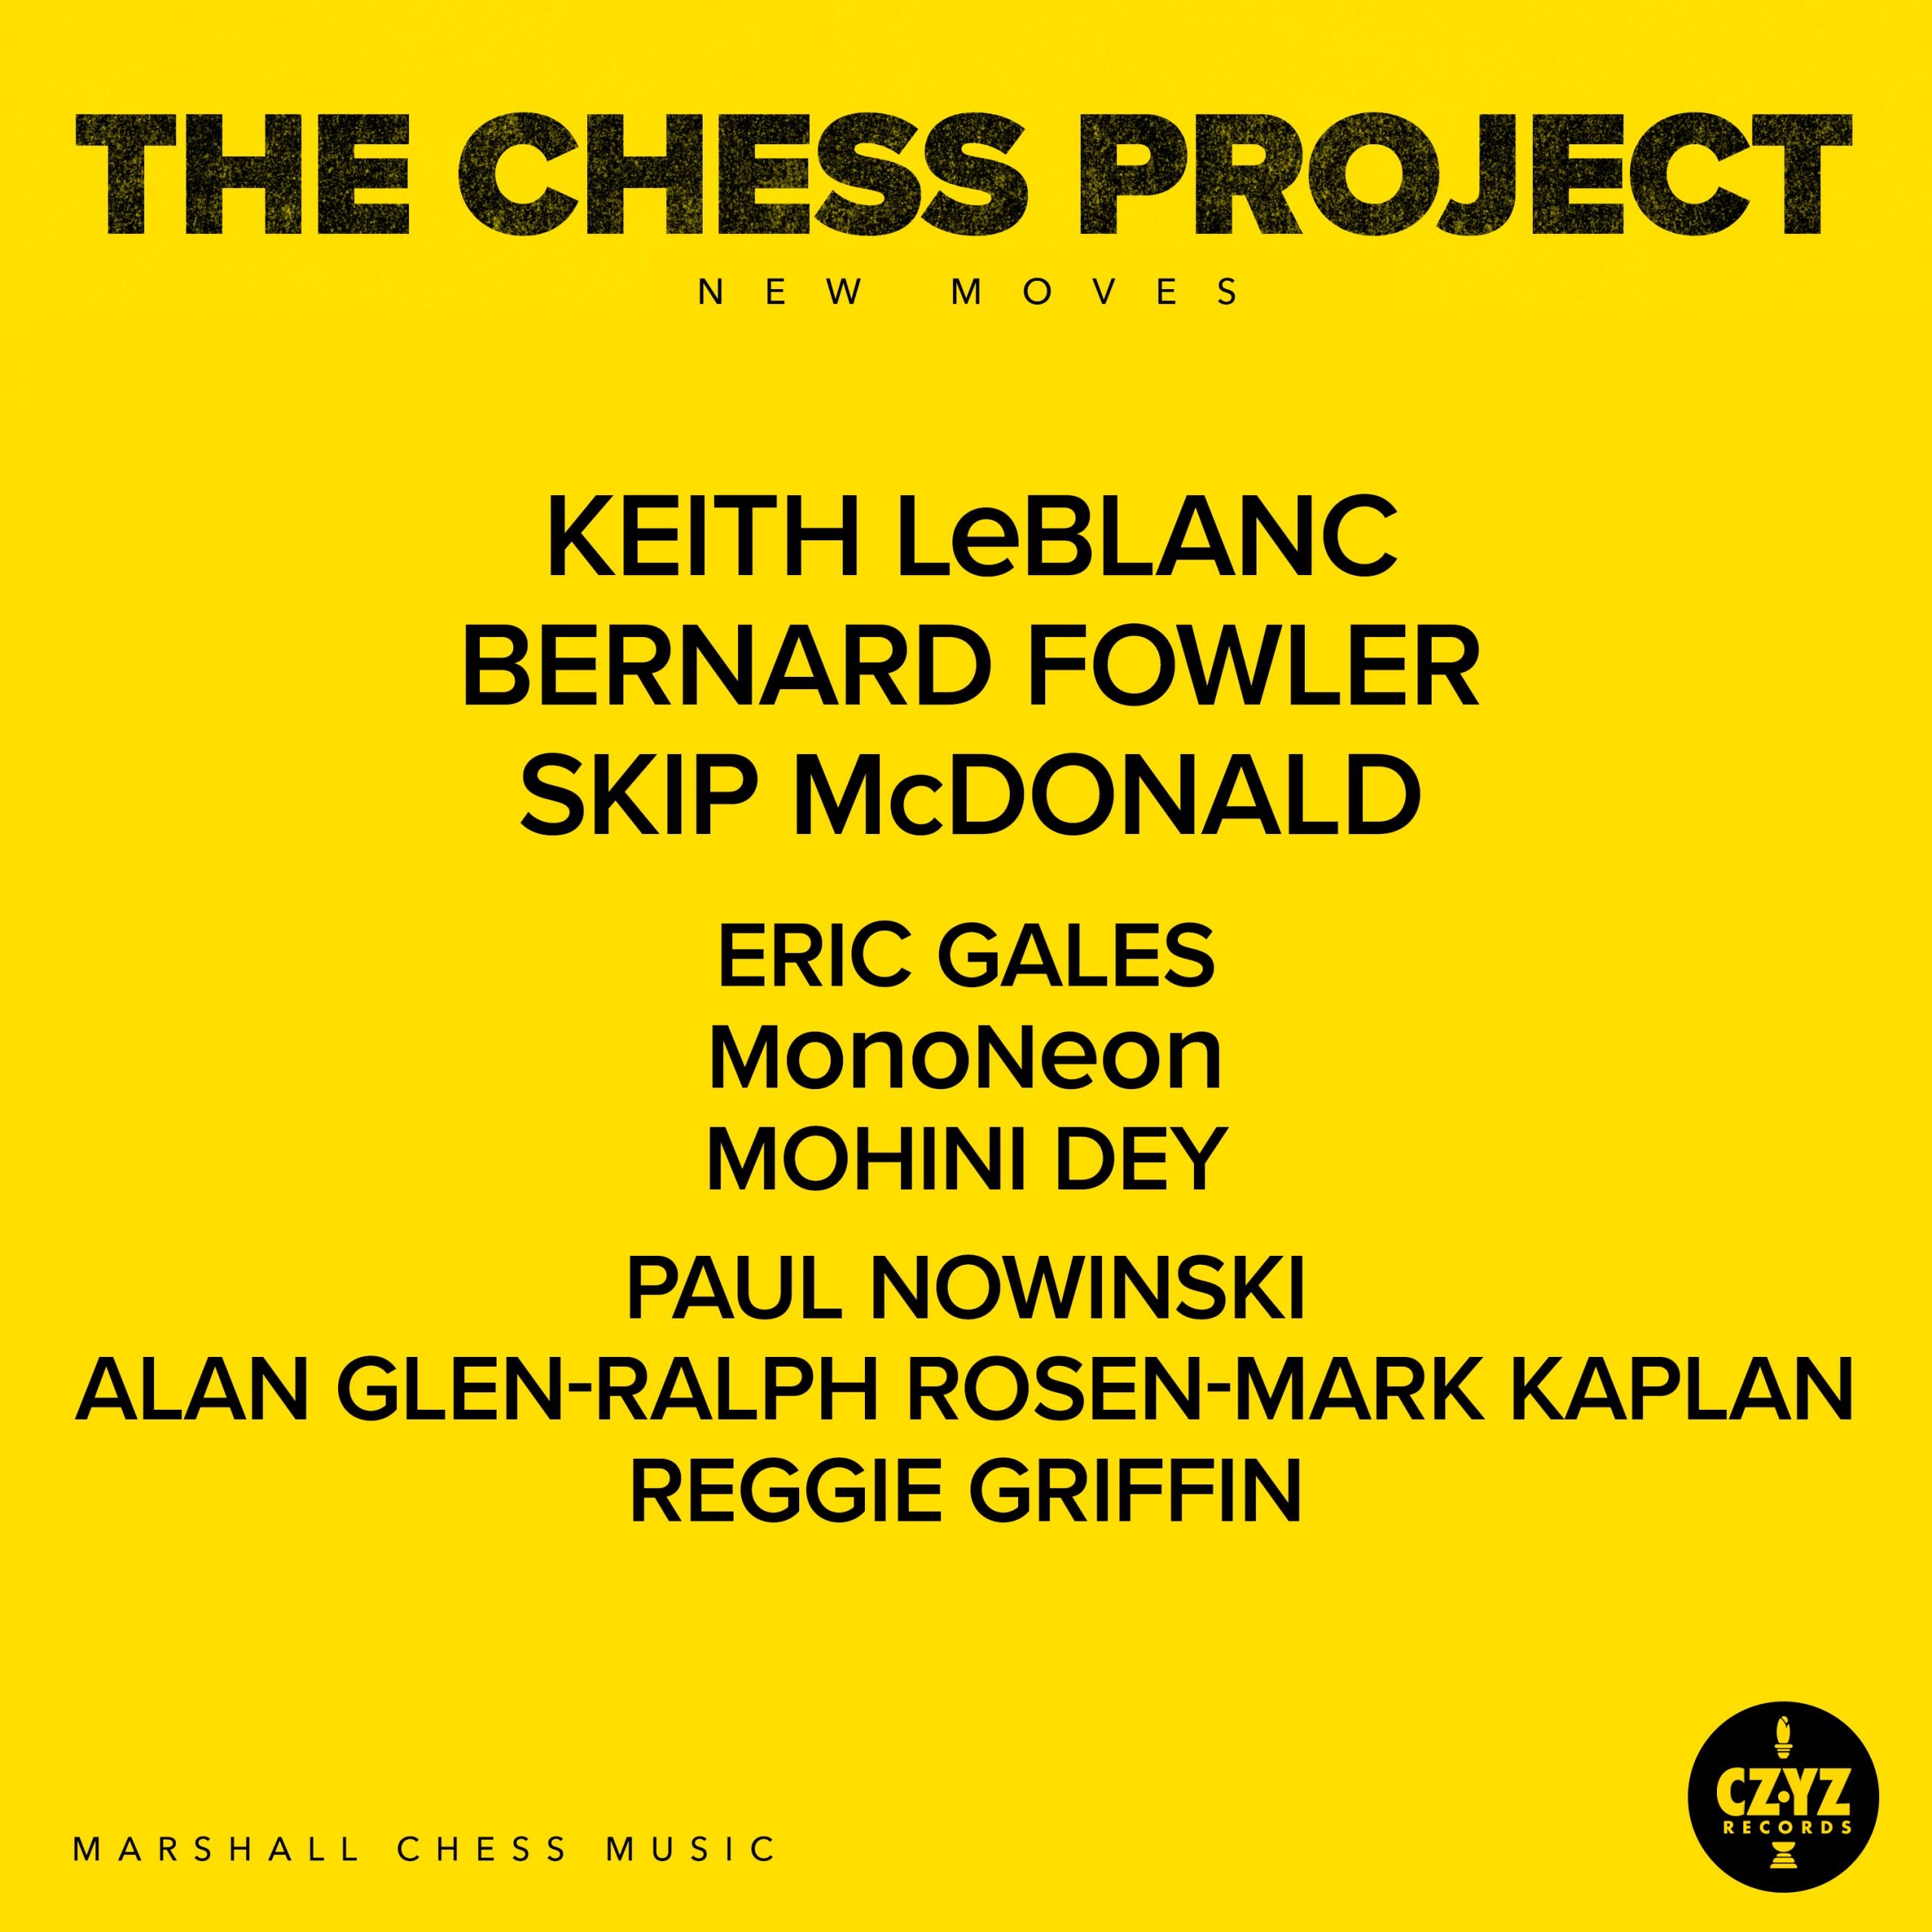 The Chess Project - New Moves